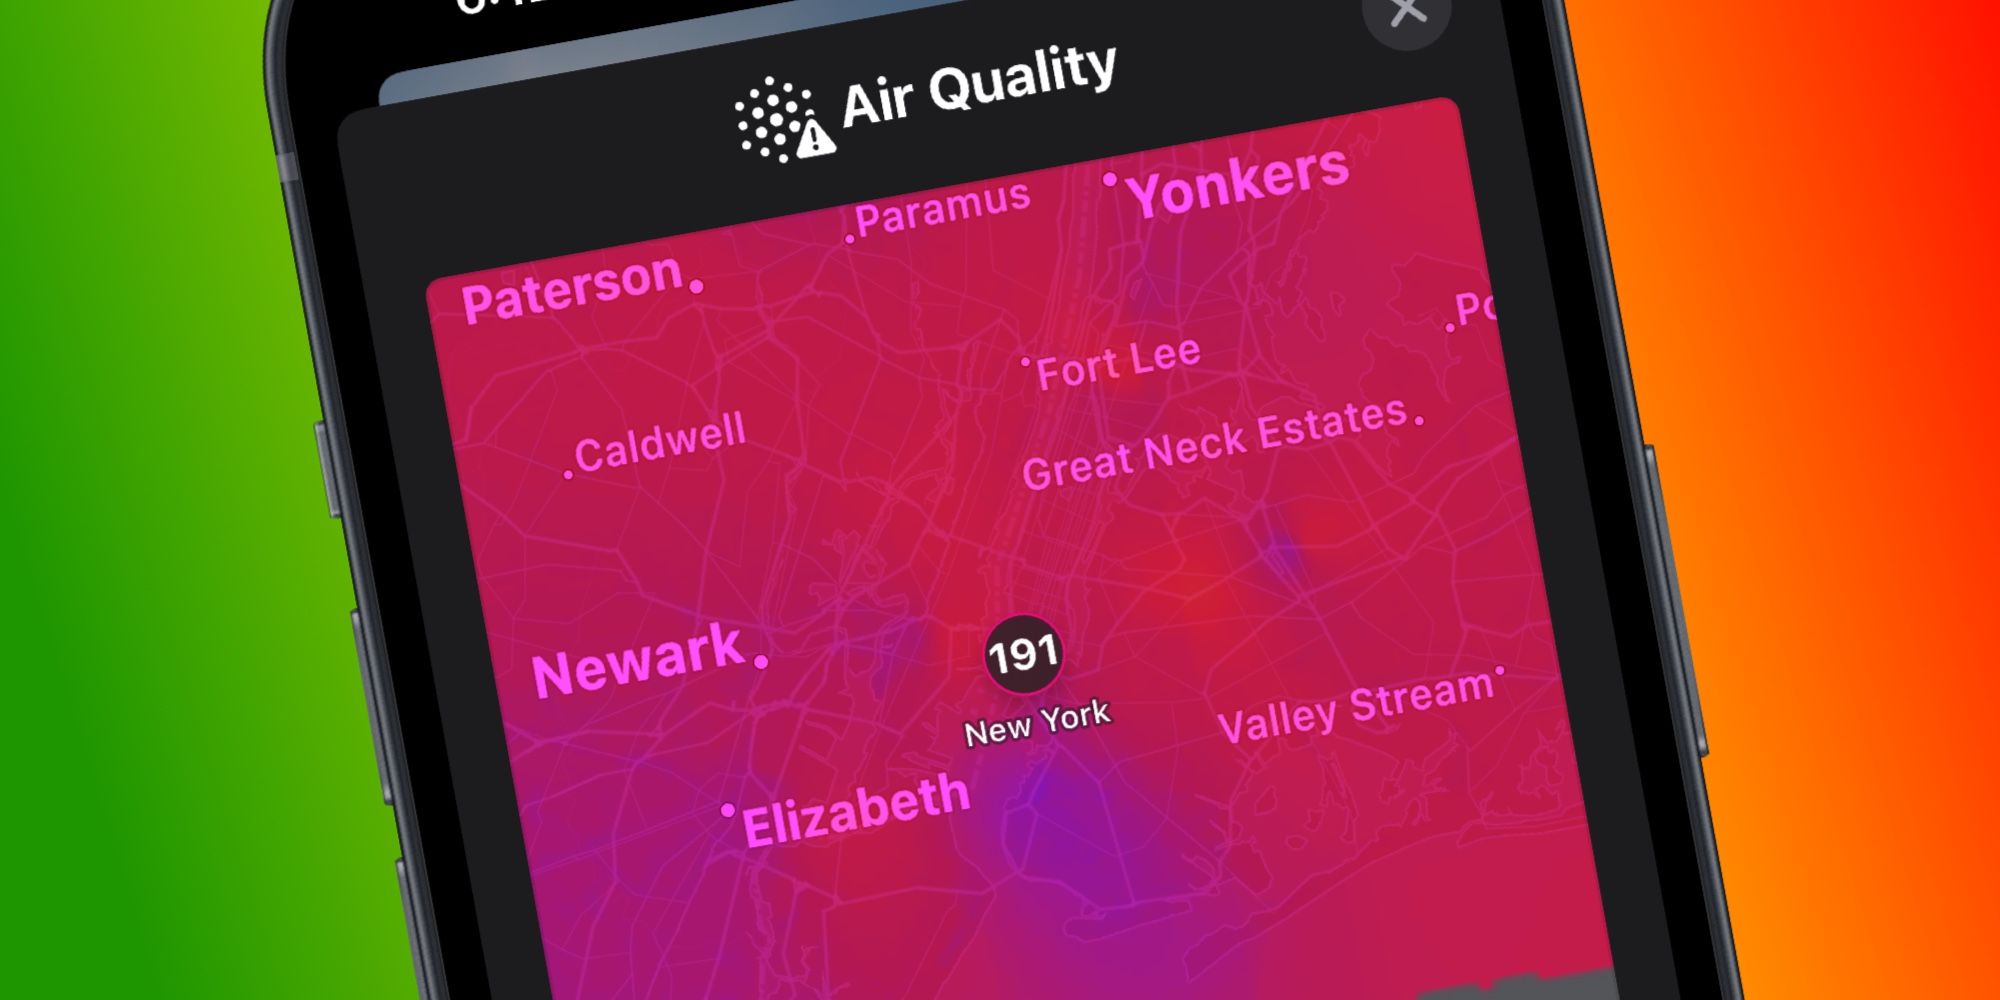 Air Quality on iPhone's Weather app